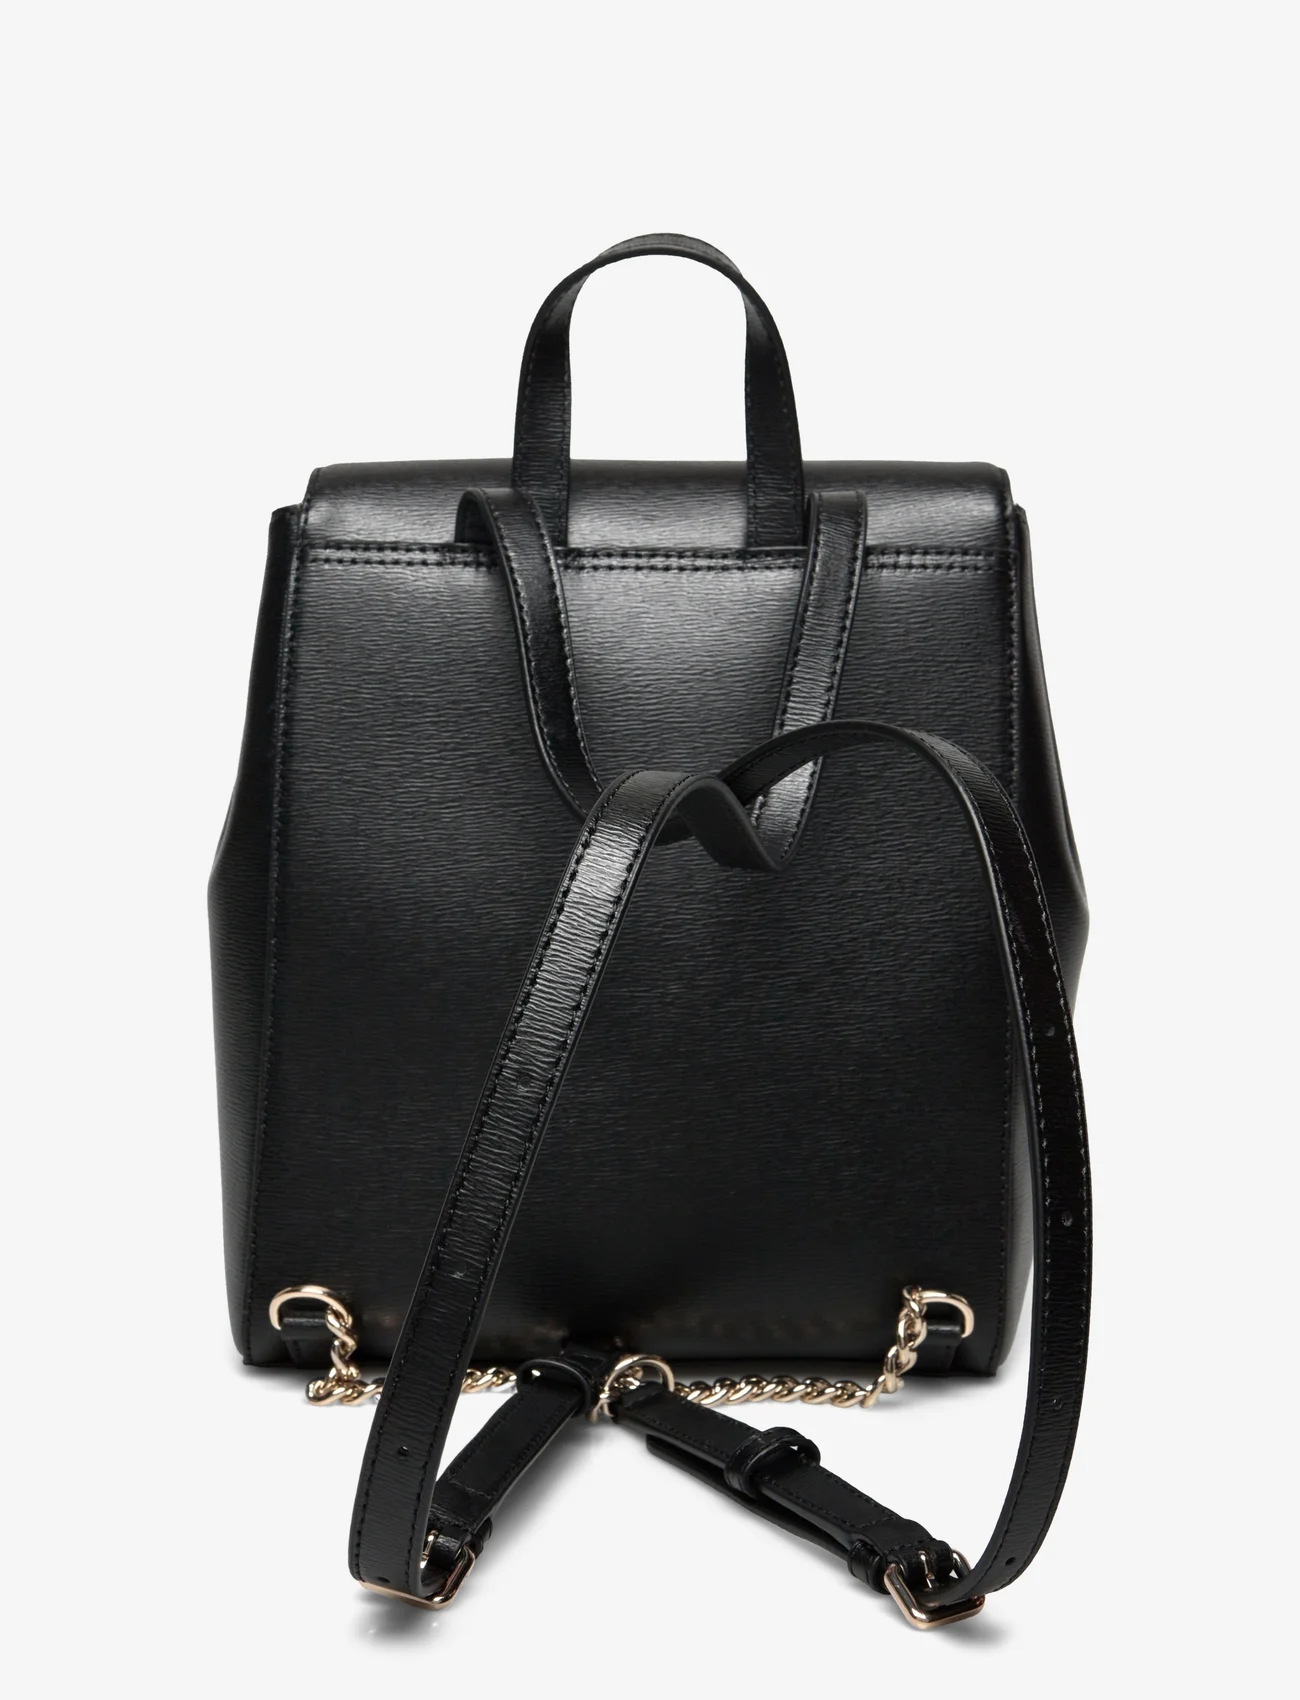 DKNY Bags - BRYANT FLAP BACKPACK - kobiety - bgd - blk/gold - 1